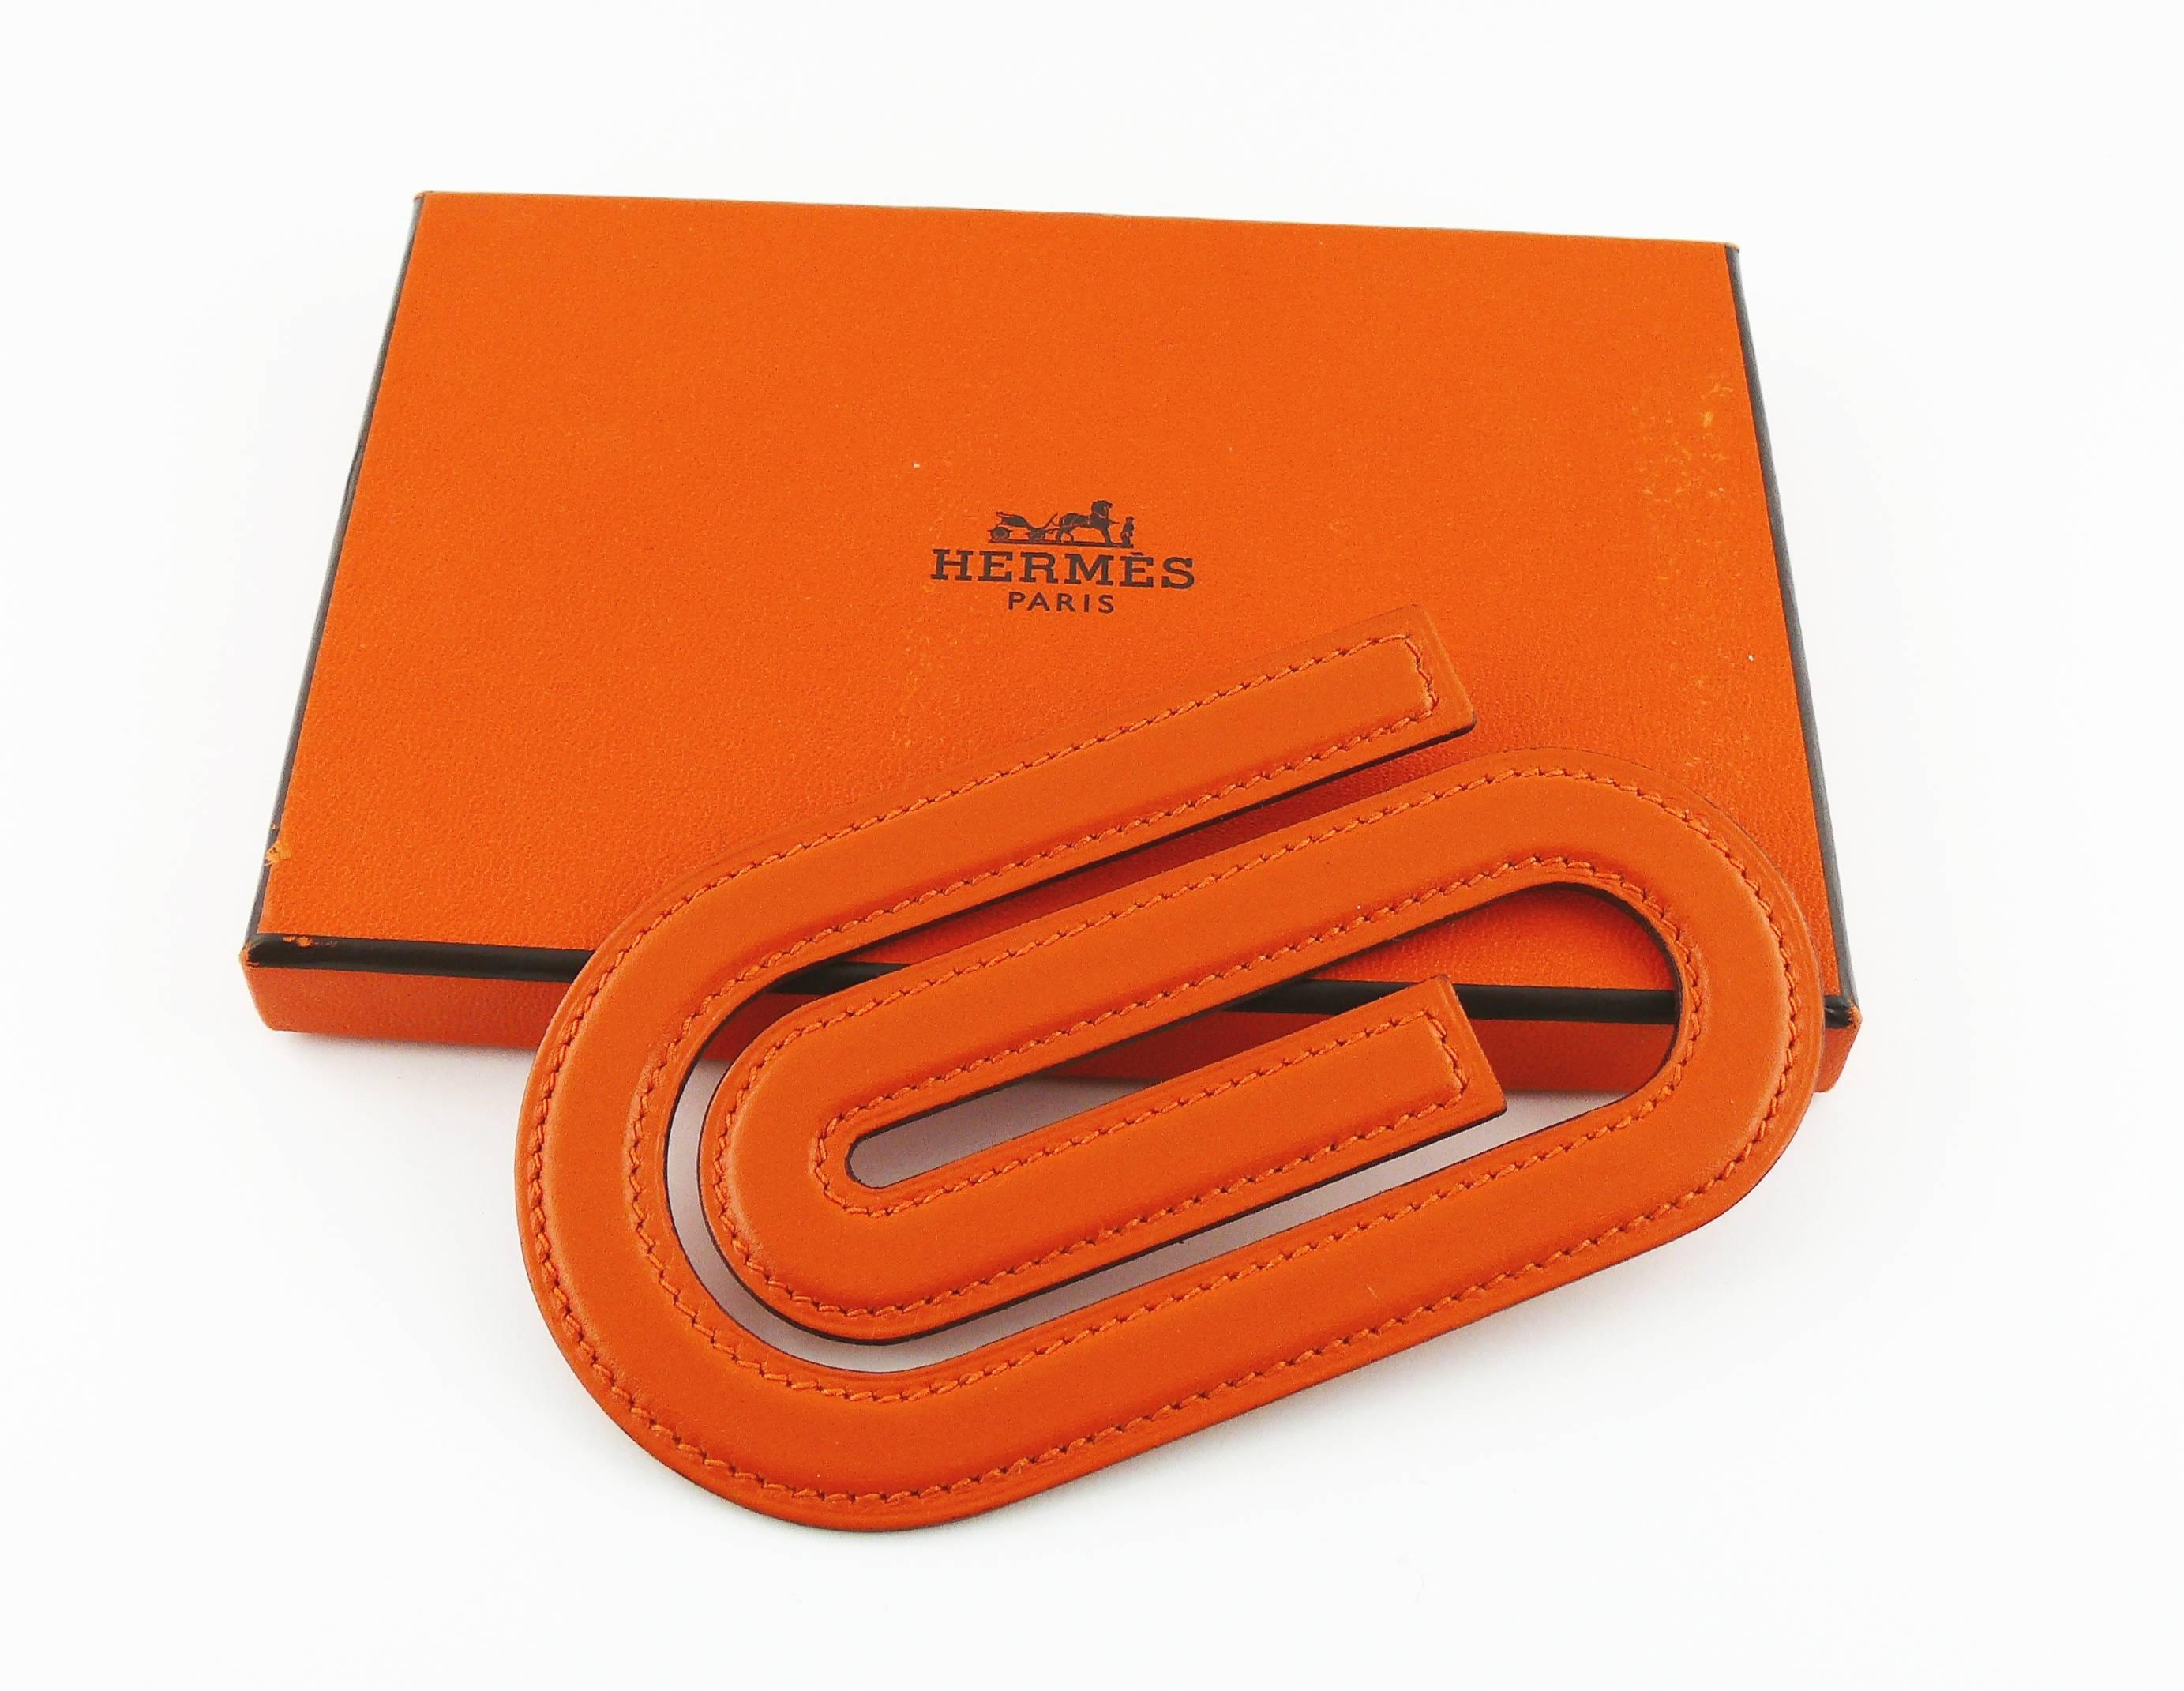 HERMES orange leather paper clip.

Embossed HERMES PARIS Made in France.
2004 letter date (H in a square).

Comes with original box.

NOTES
This is a preloved item, therefore it might have imperfections.
As a buyer, you are fully